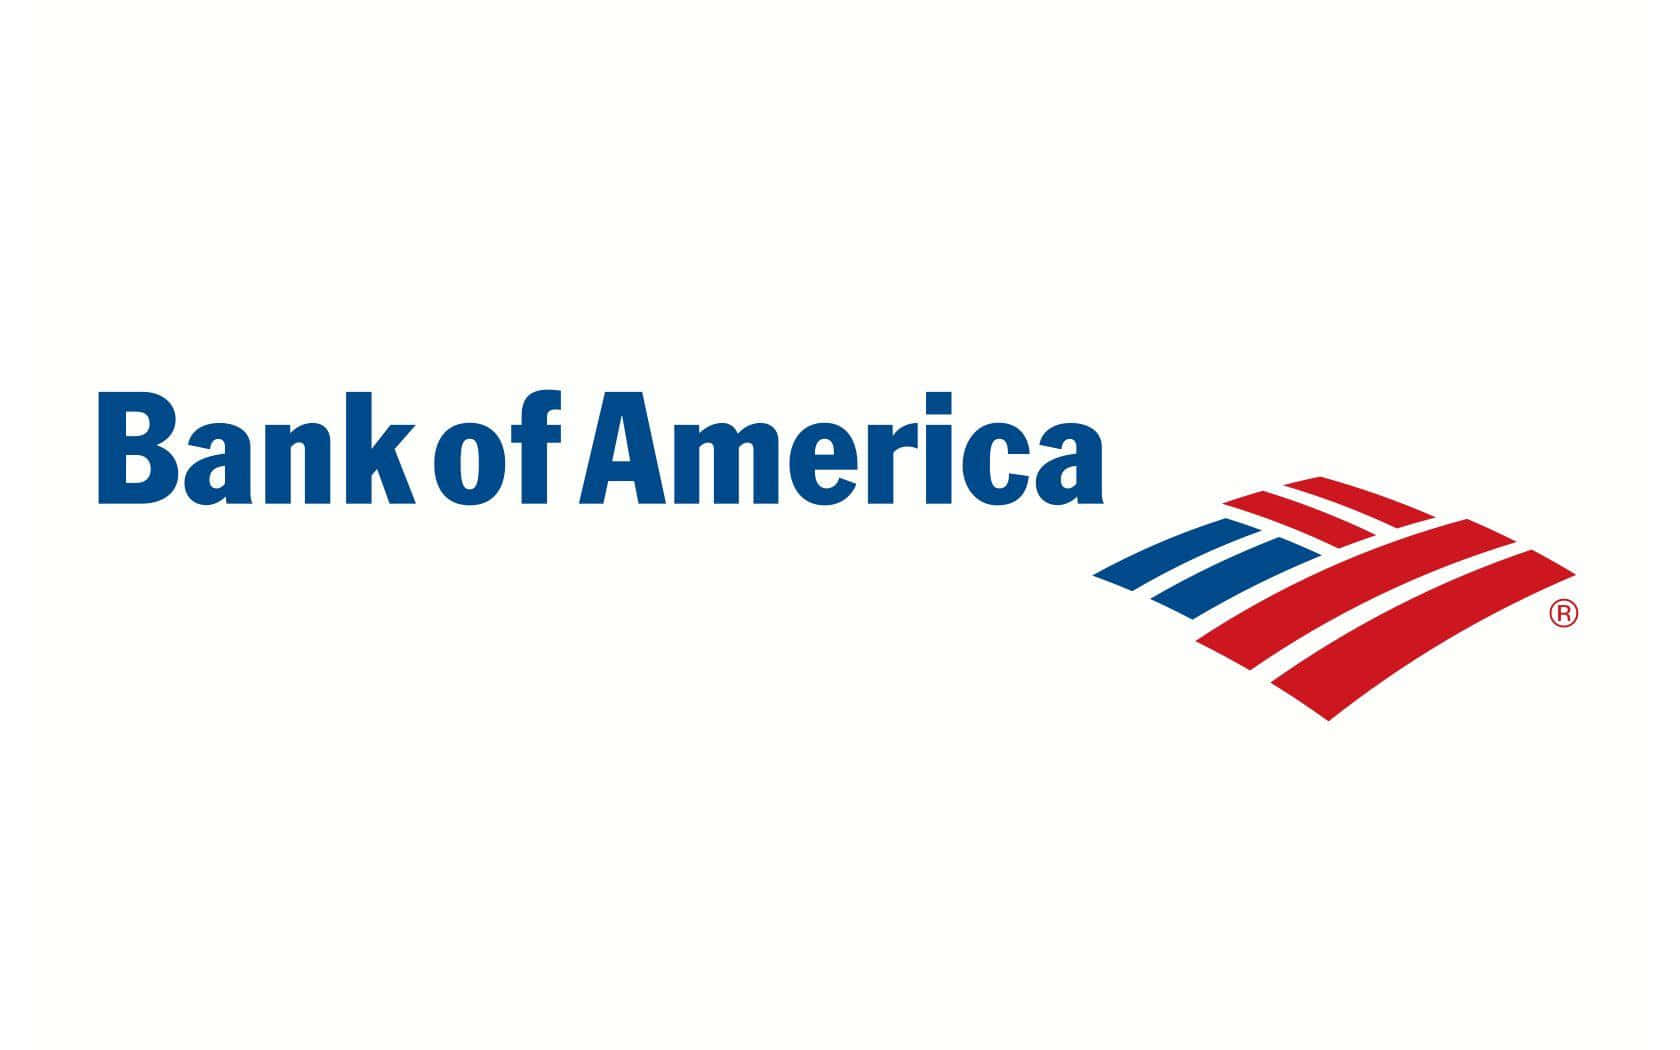 “Secure Your Financial Future with Bank of America”